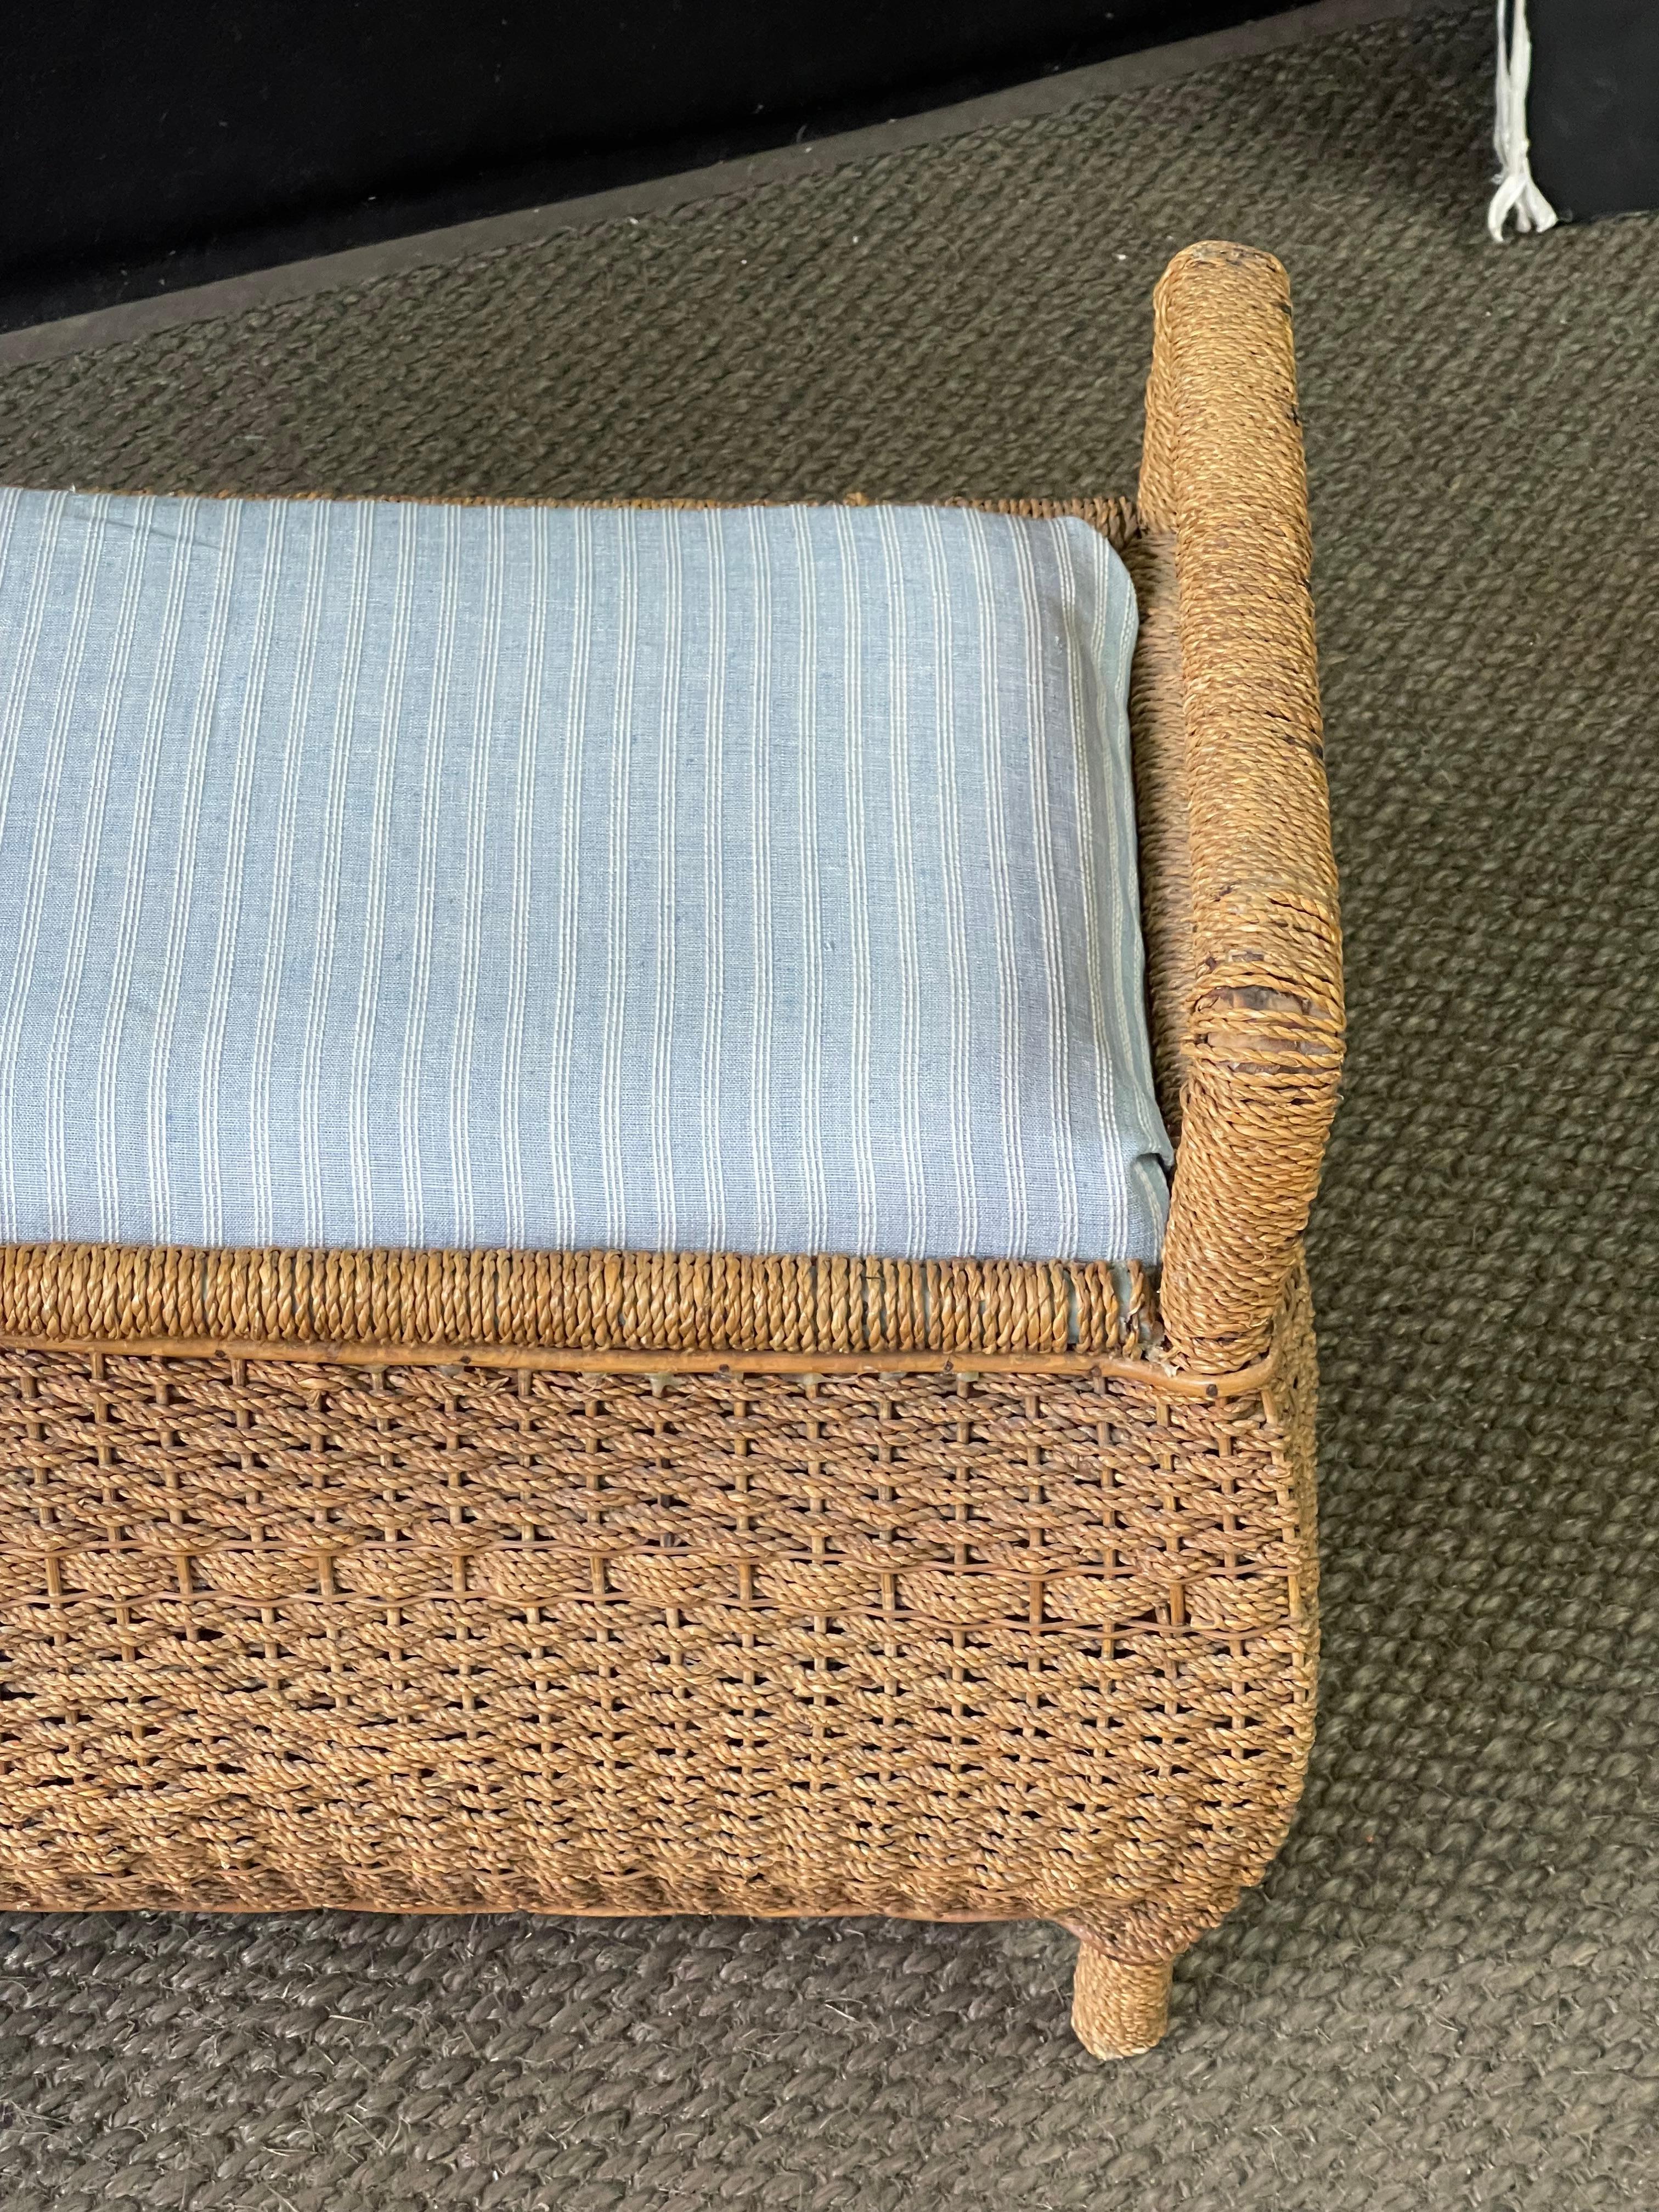 English Bombay-Shaped Woven Rattan Bench For Sale 6